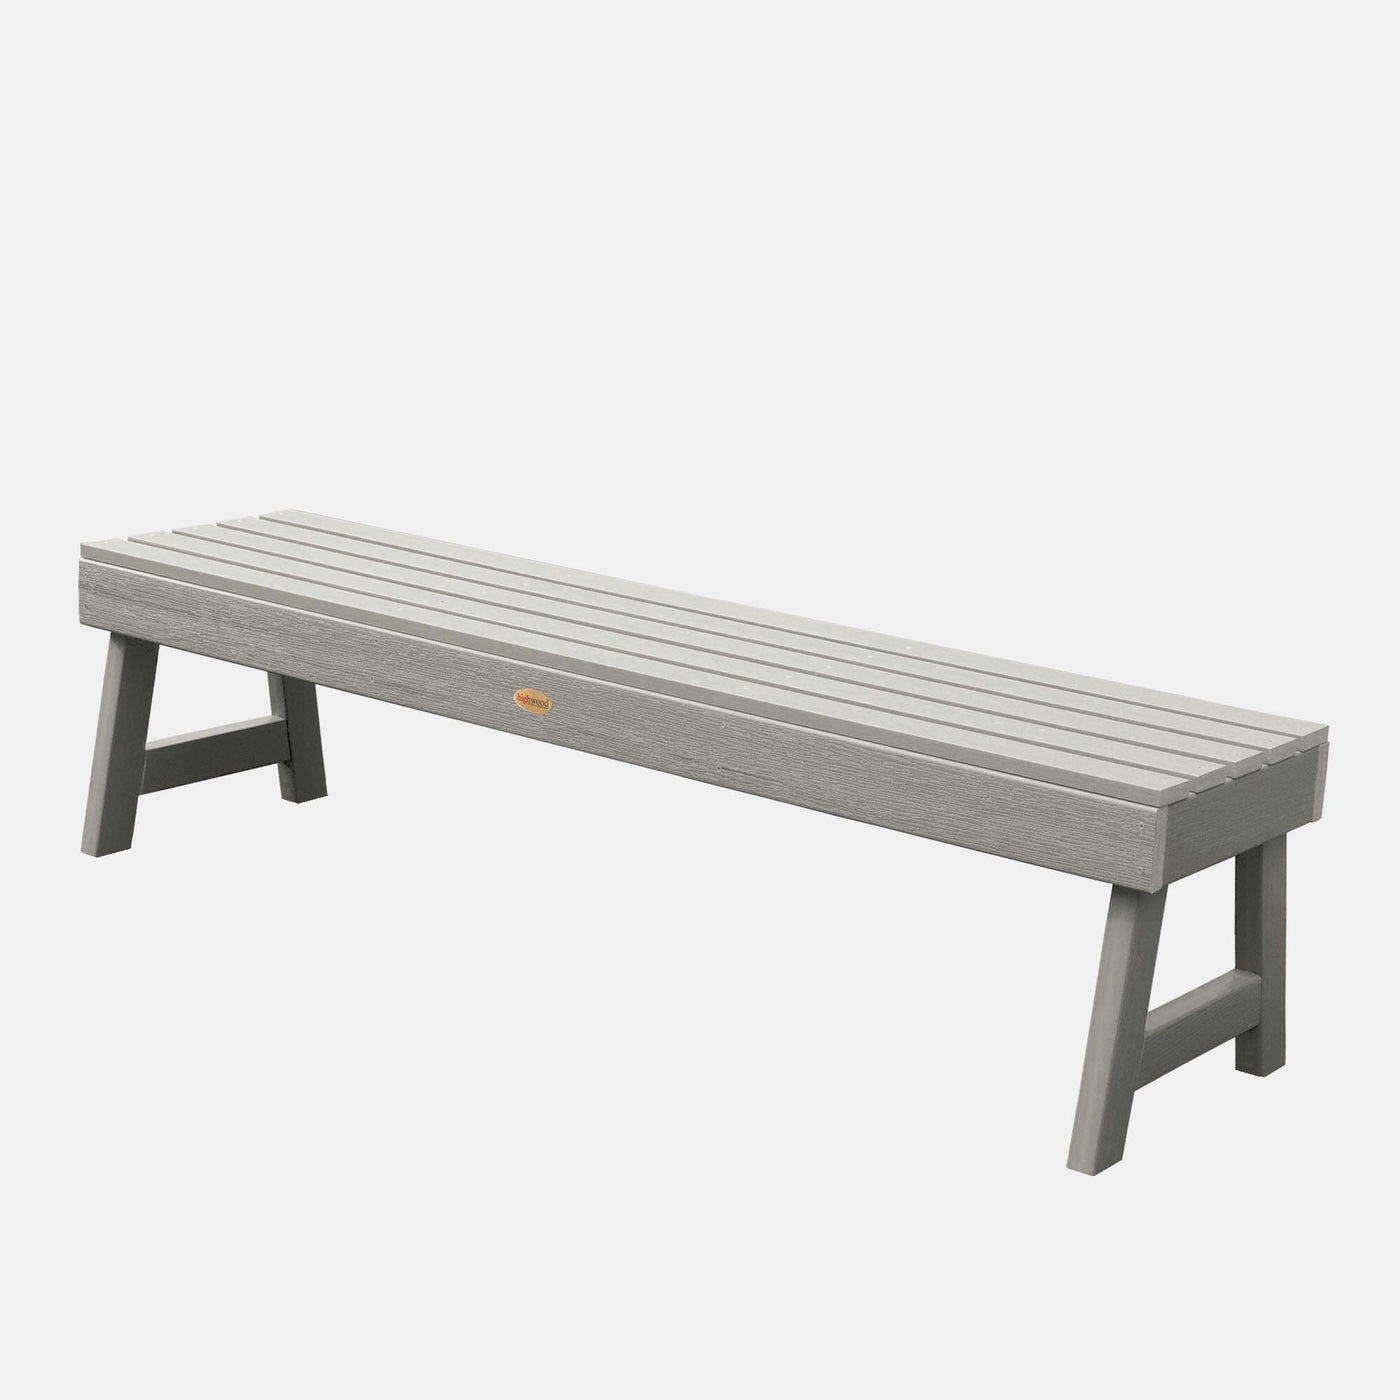 Weatherly Picnic Backless Bench - 5ft Bench Highwood USA Harbor Gray 